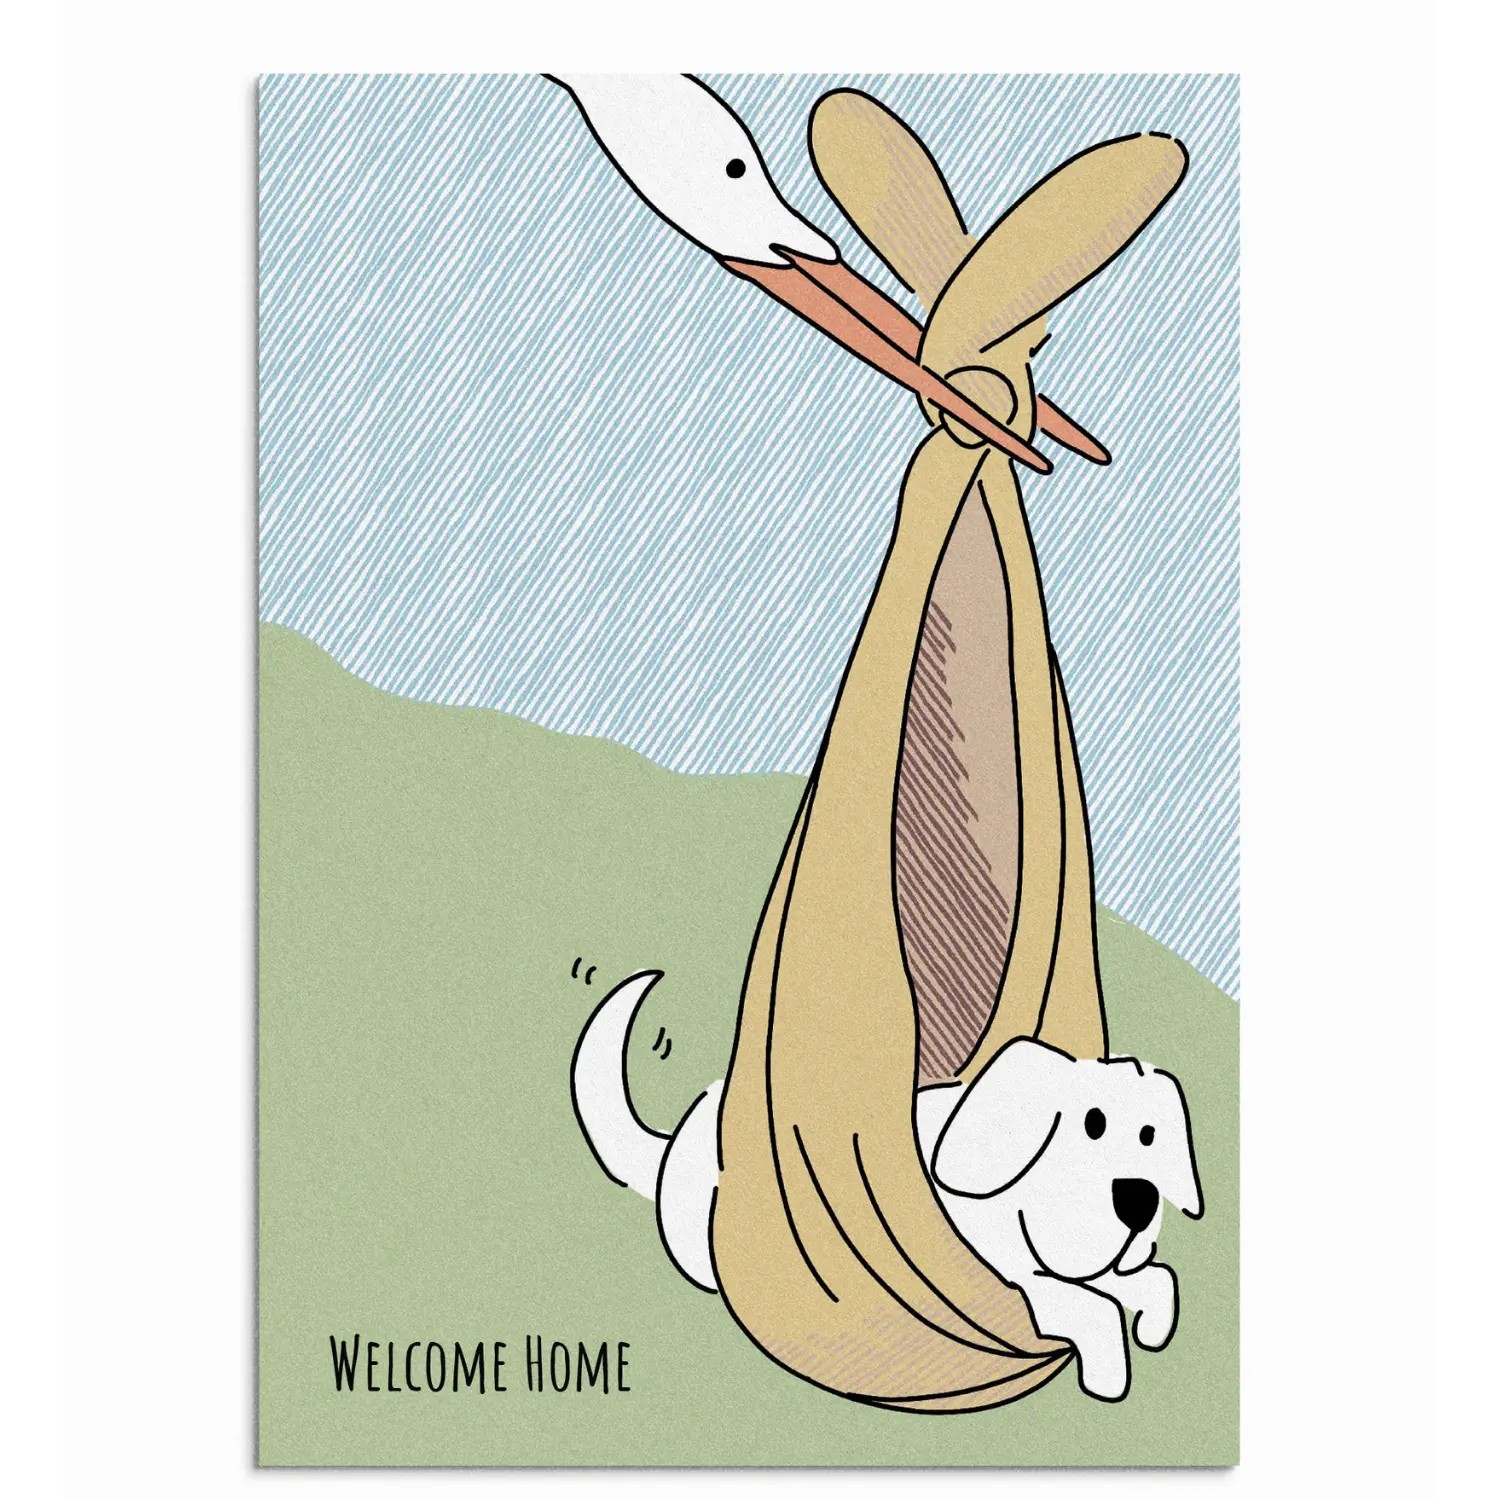 Poochie Post Edible Greeting Card For Dogs - Welcome Home